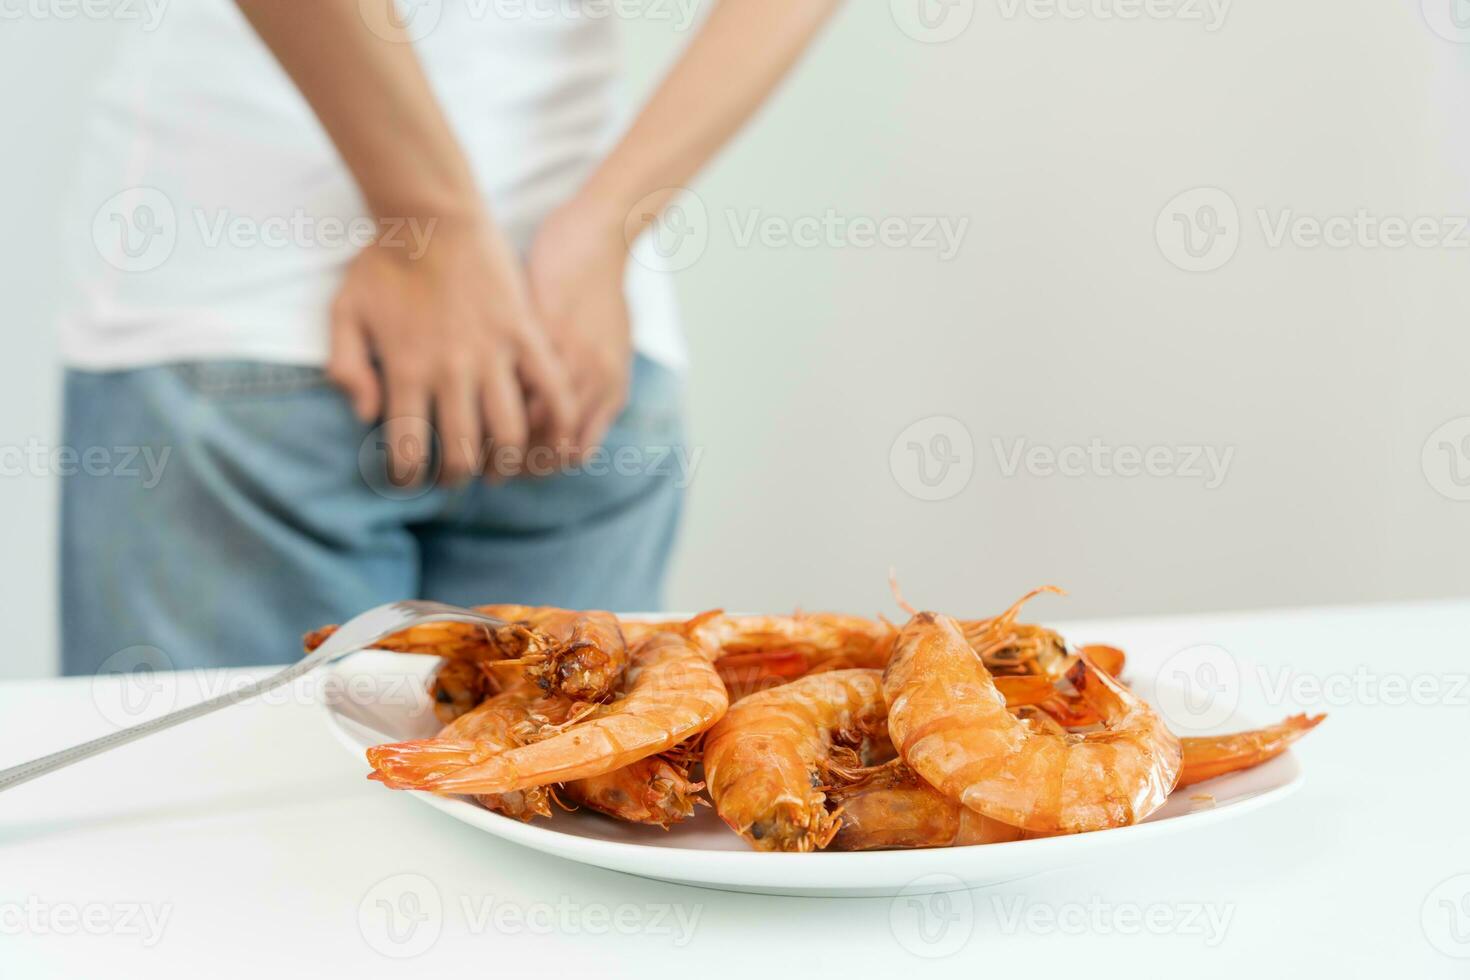 food allergies, women have reactions itching and redness after eating shrimp, seafood allergy, itching, rash, abdominal pain, diarrhea, chest tightness, unconsciousness, death, severe avoid allergies photo